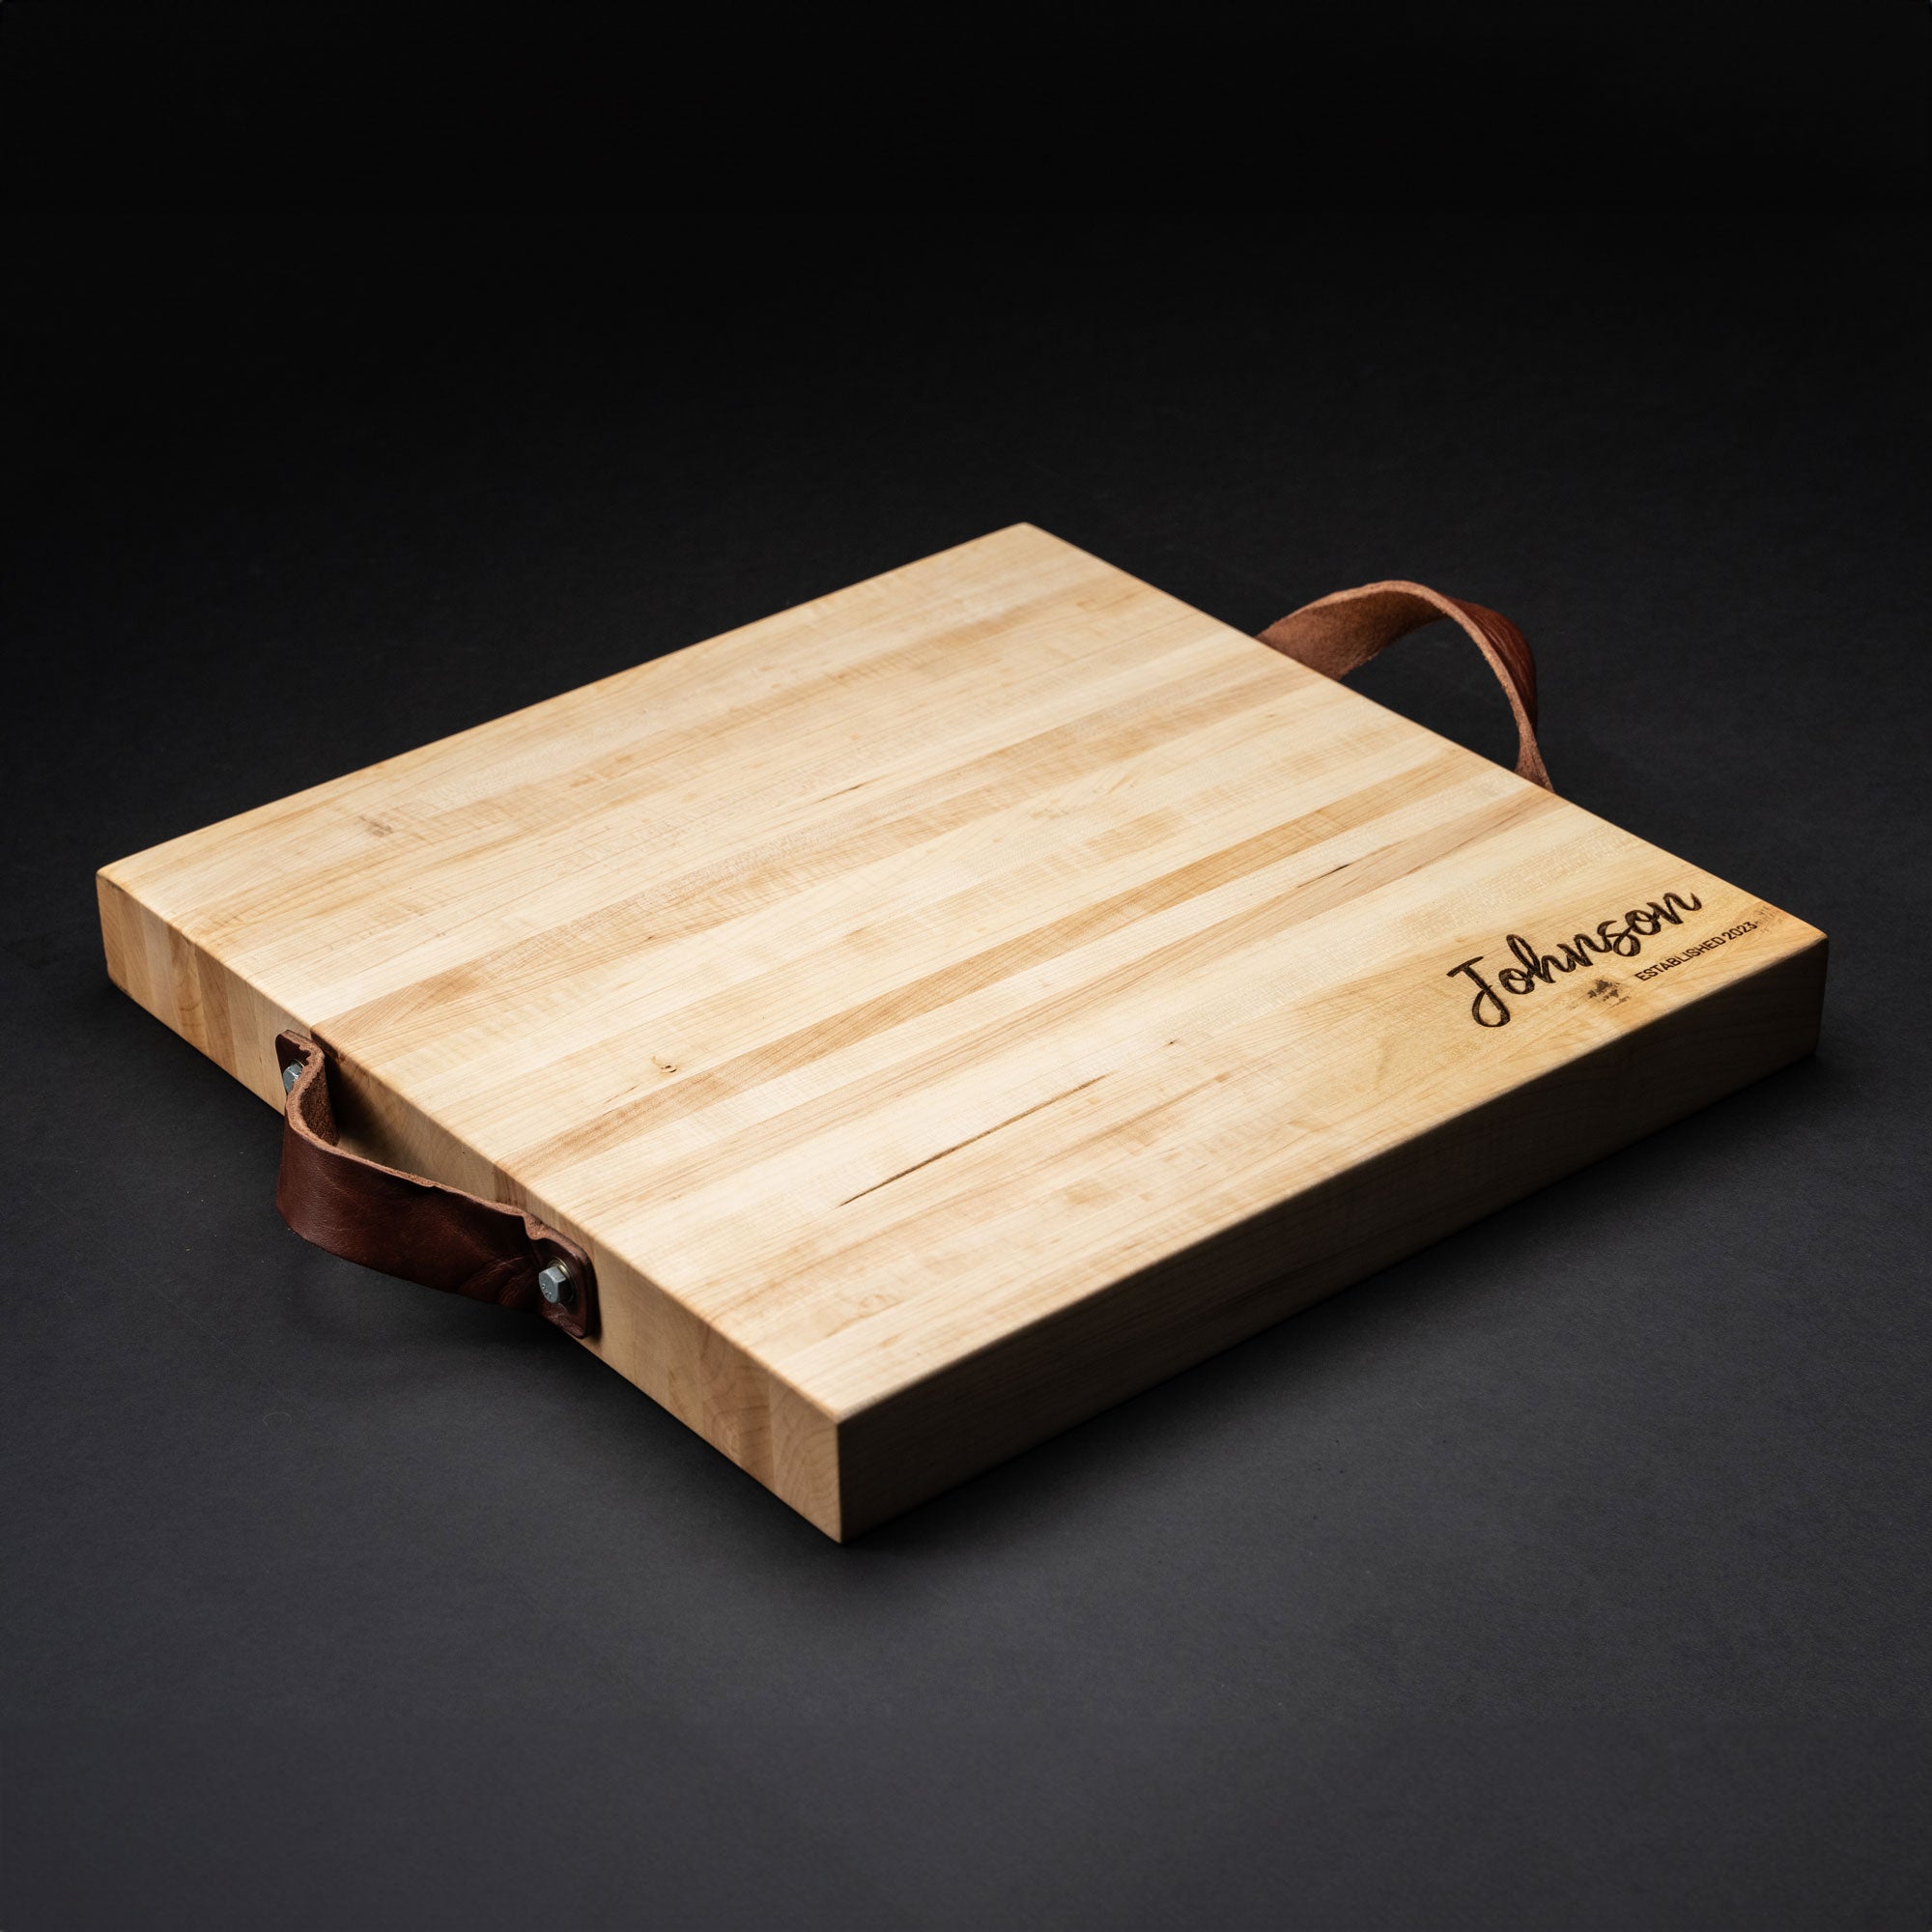 Aunt B's Kitchen Cutting Board - Wooden Cutting Boards For Sale